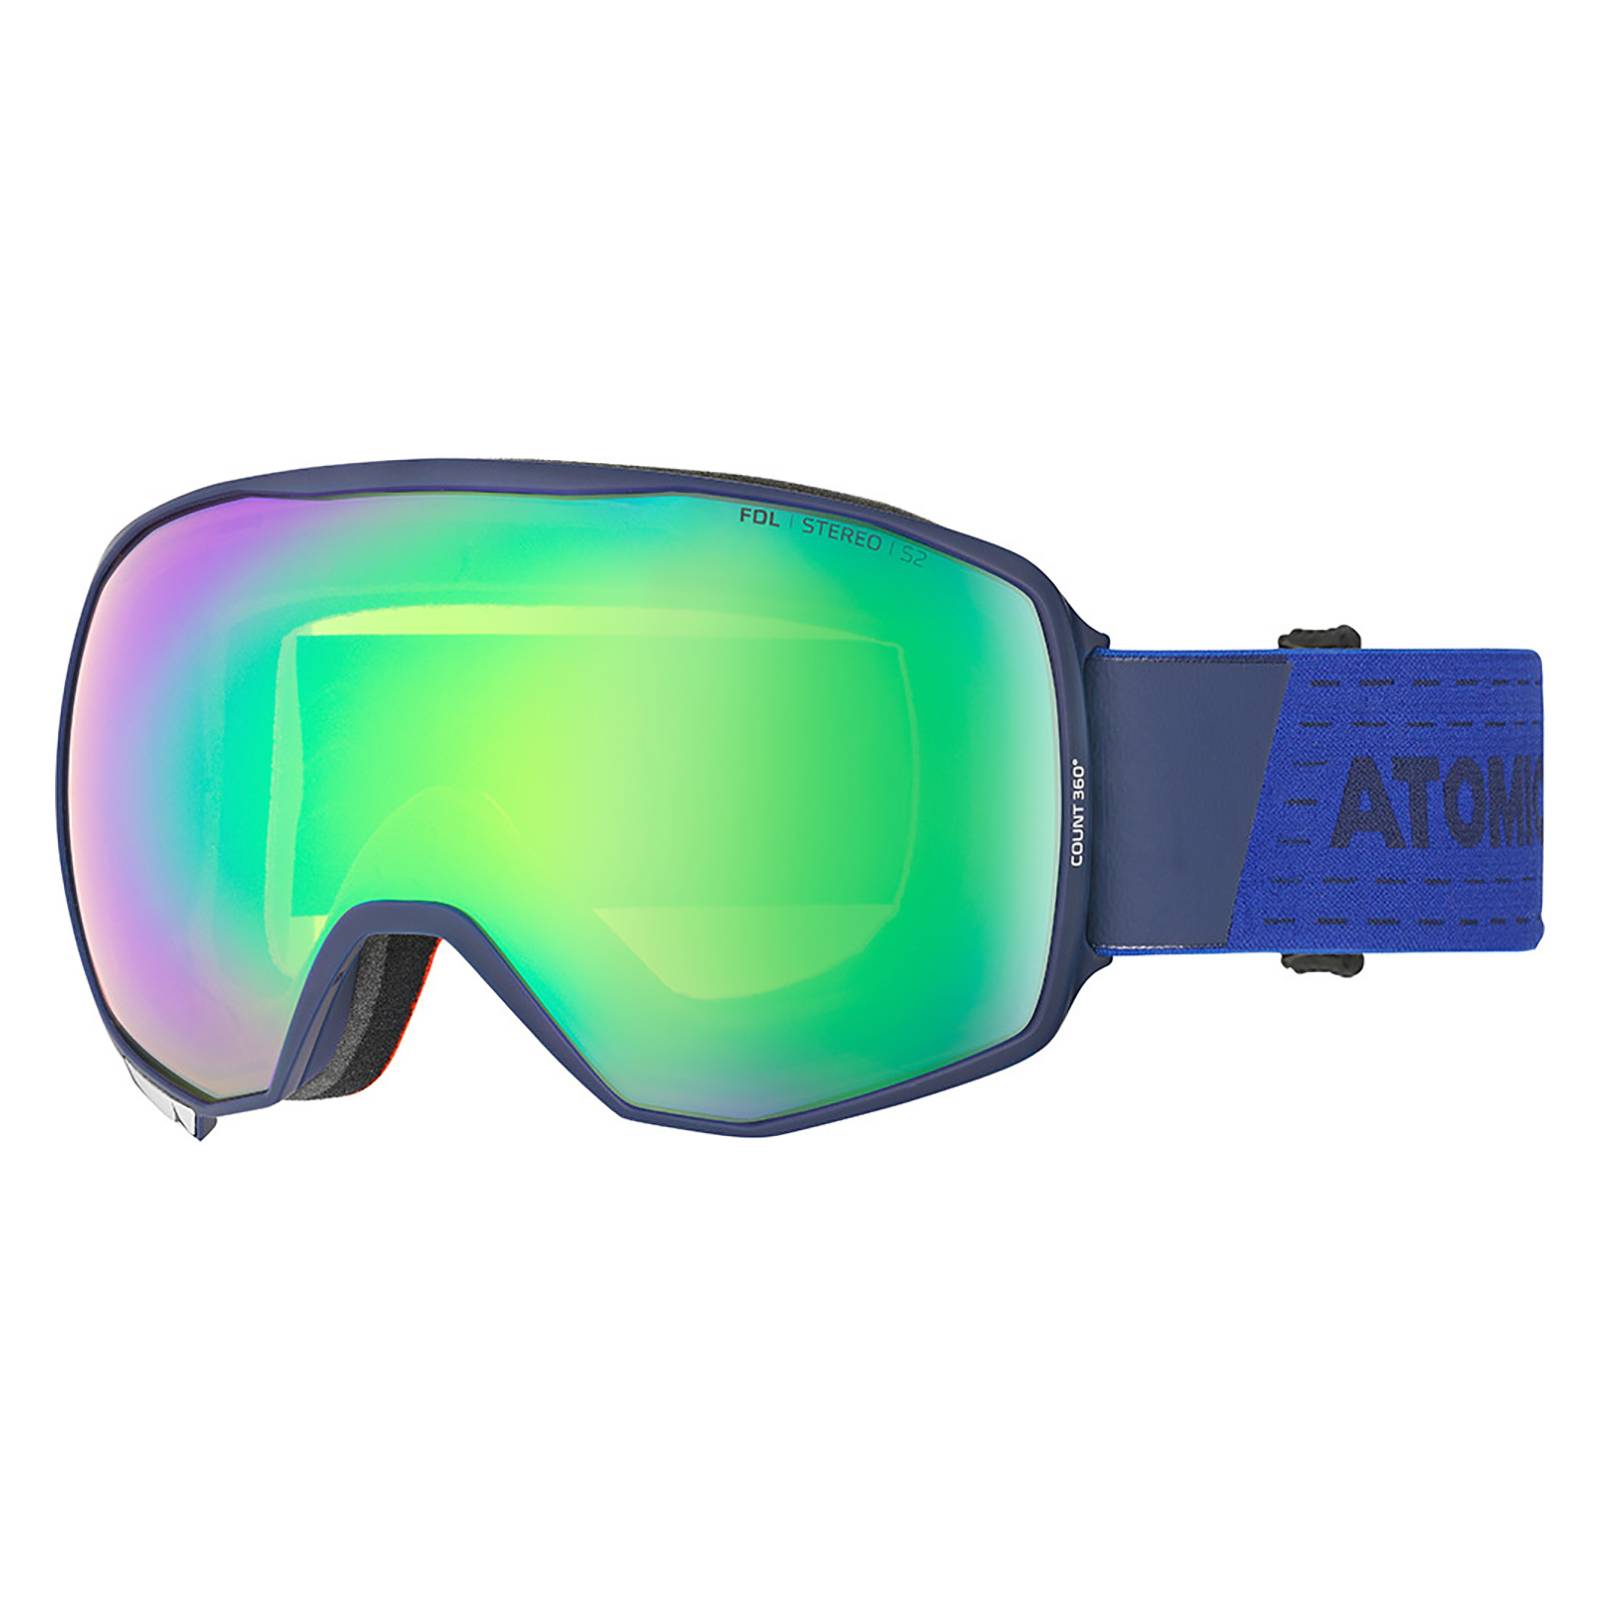 ATOMIC Count 360° Stereo Skibrille blau